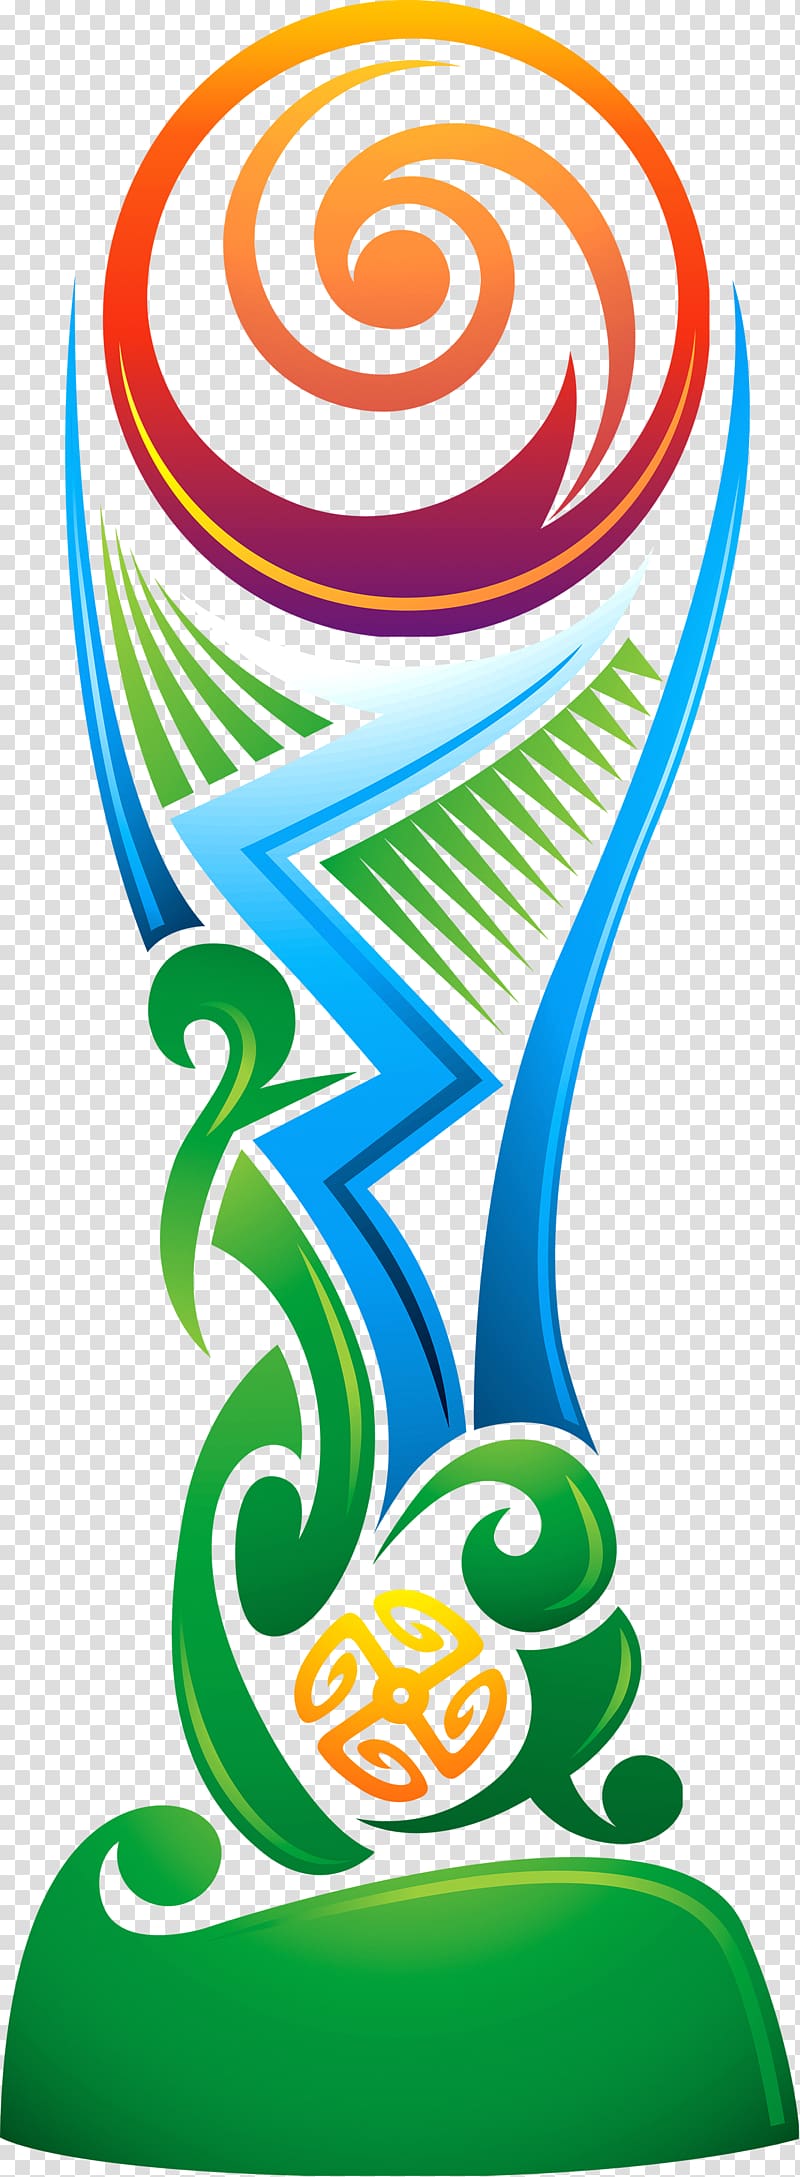 green, blue, and red art, 2015 FIFA U-20 World Cup 2015 Cricket World Cup New Zealand 2017 FIFA U-20 World Cup 2014 FIFA World Cup, World Cup transparent background PNG clipart